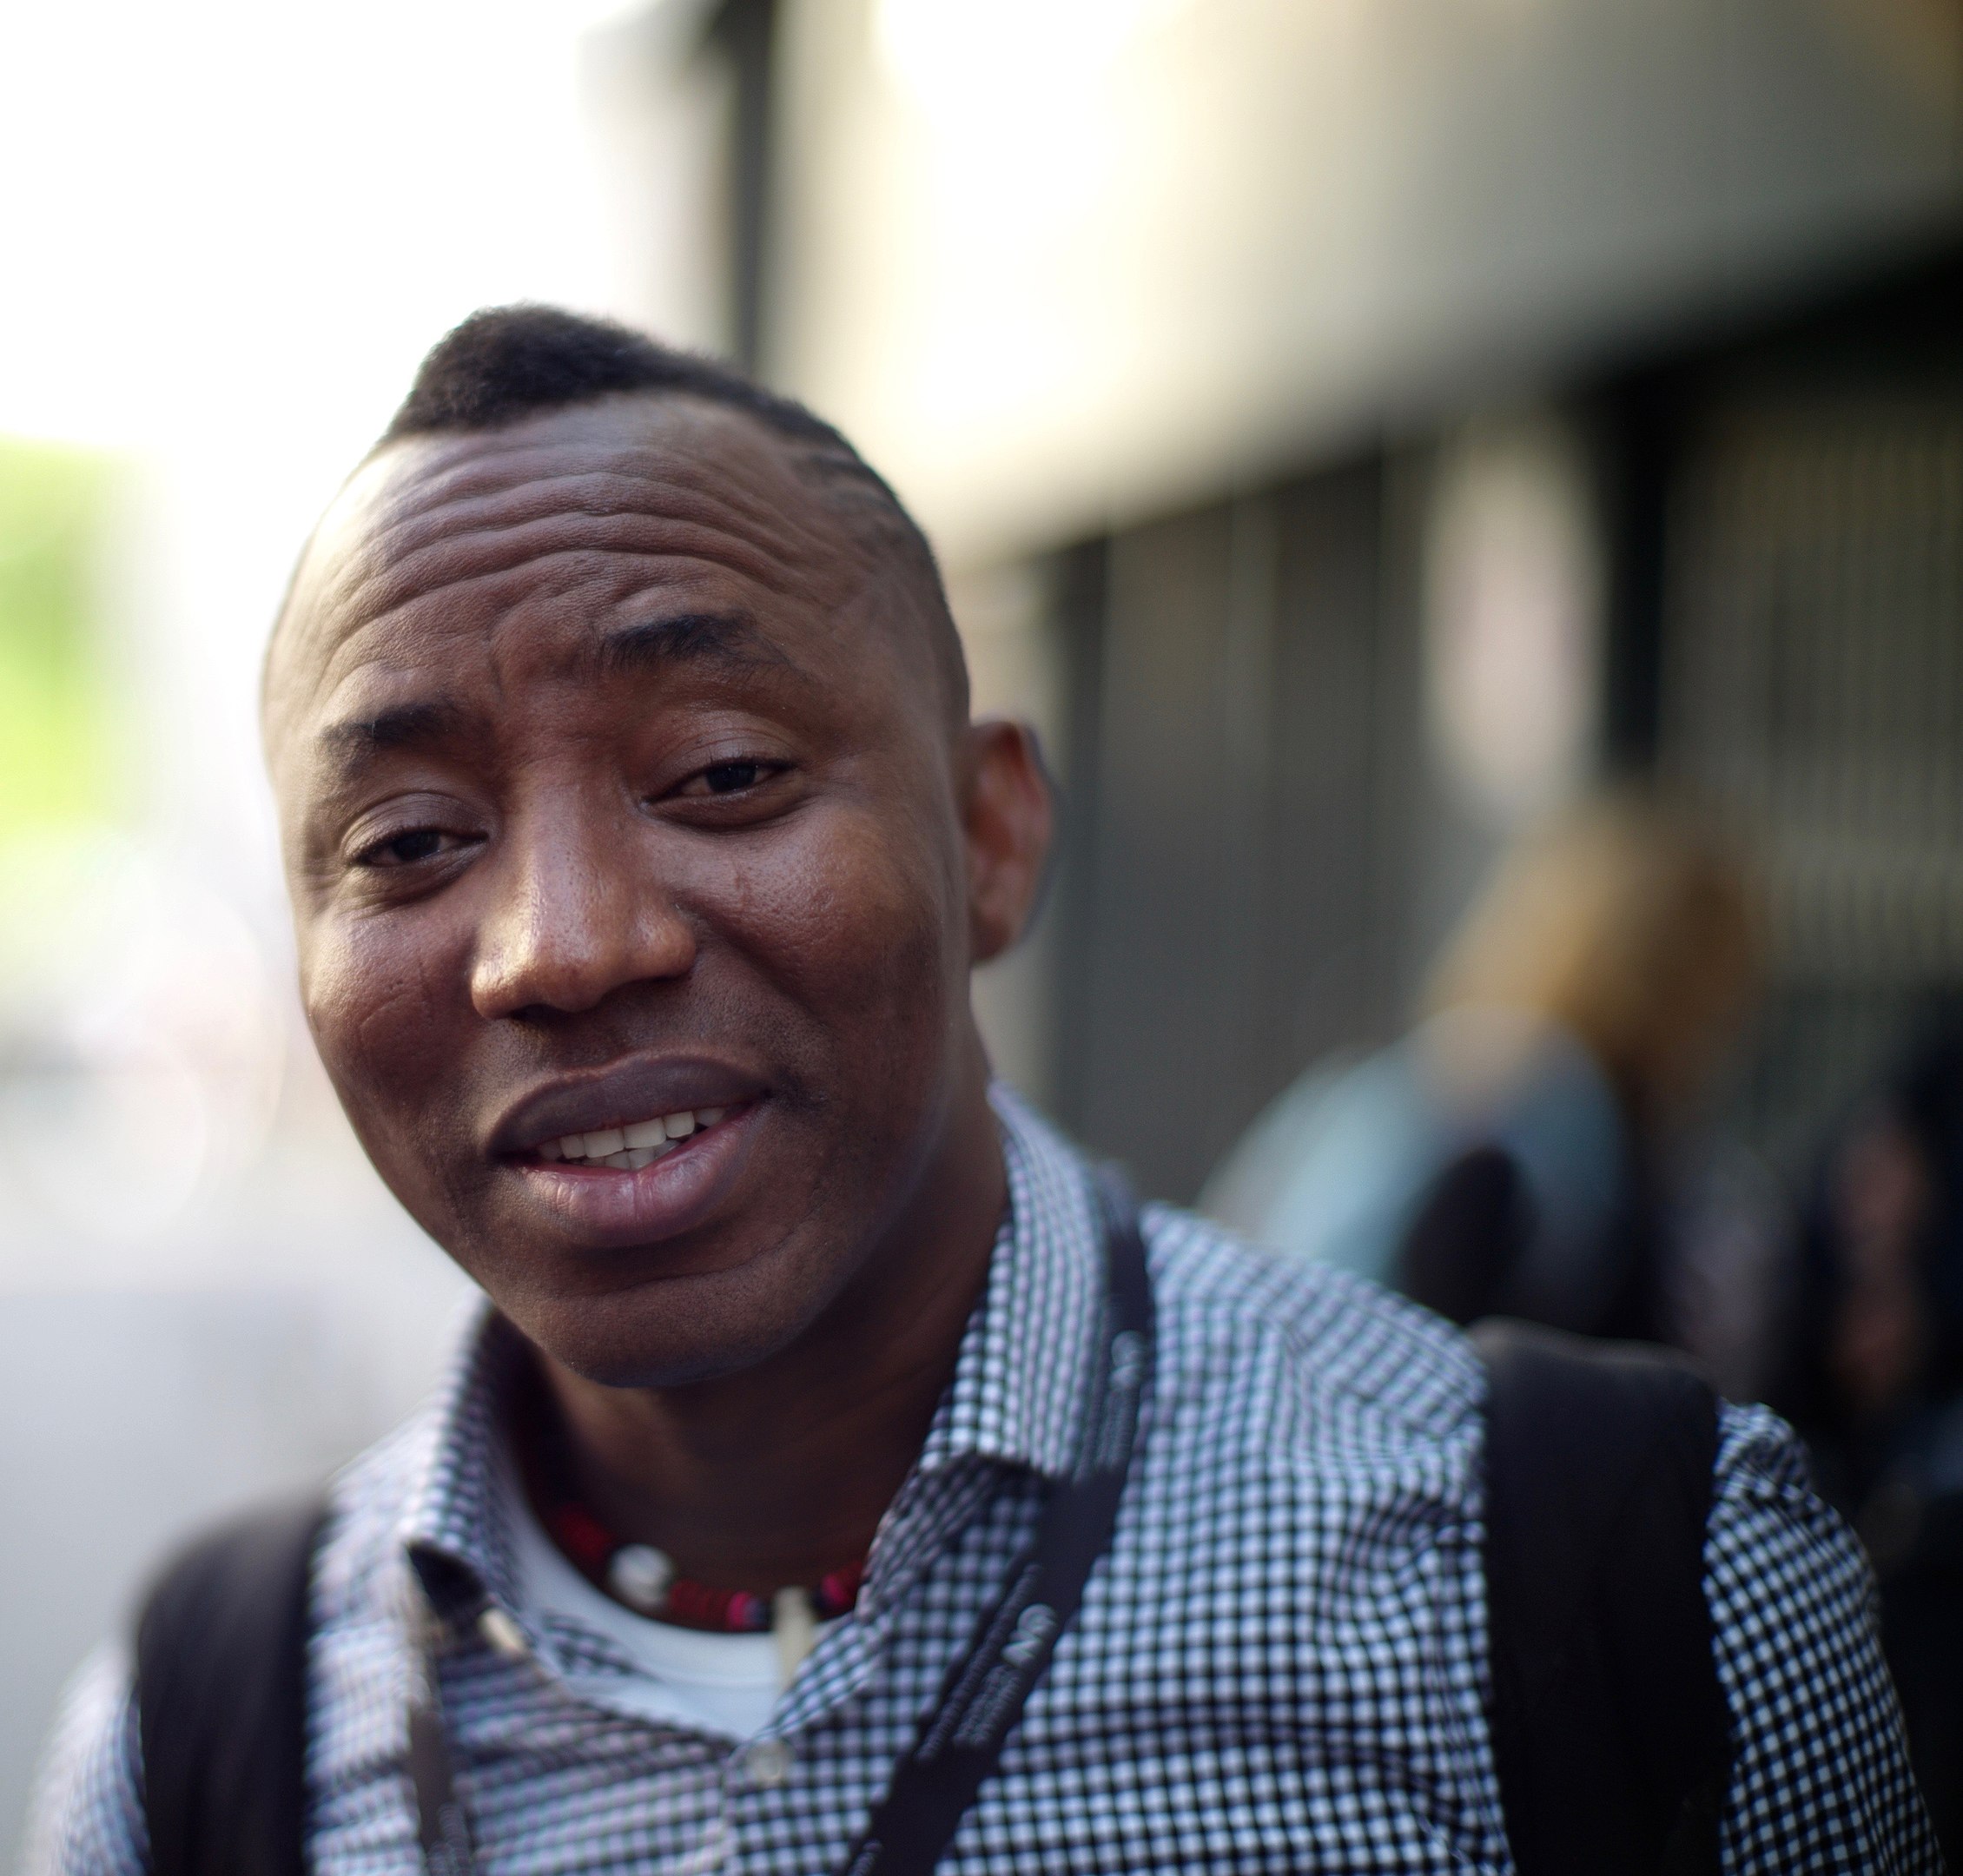 Urgent appeal in relation to the arrest and detention of Omoyele Sowore, Nigerian journalist and human rights defender